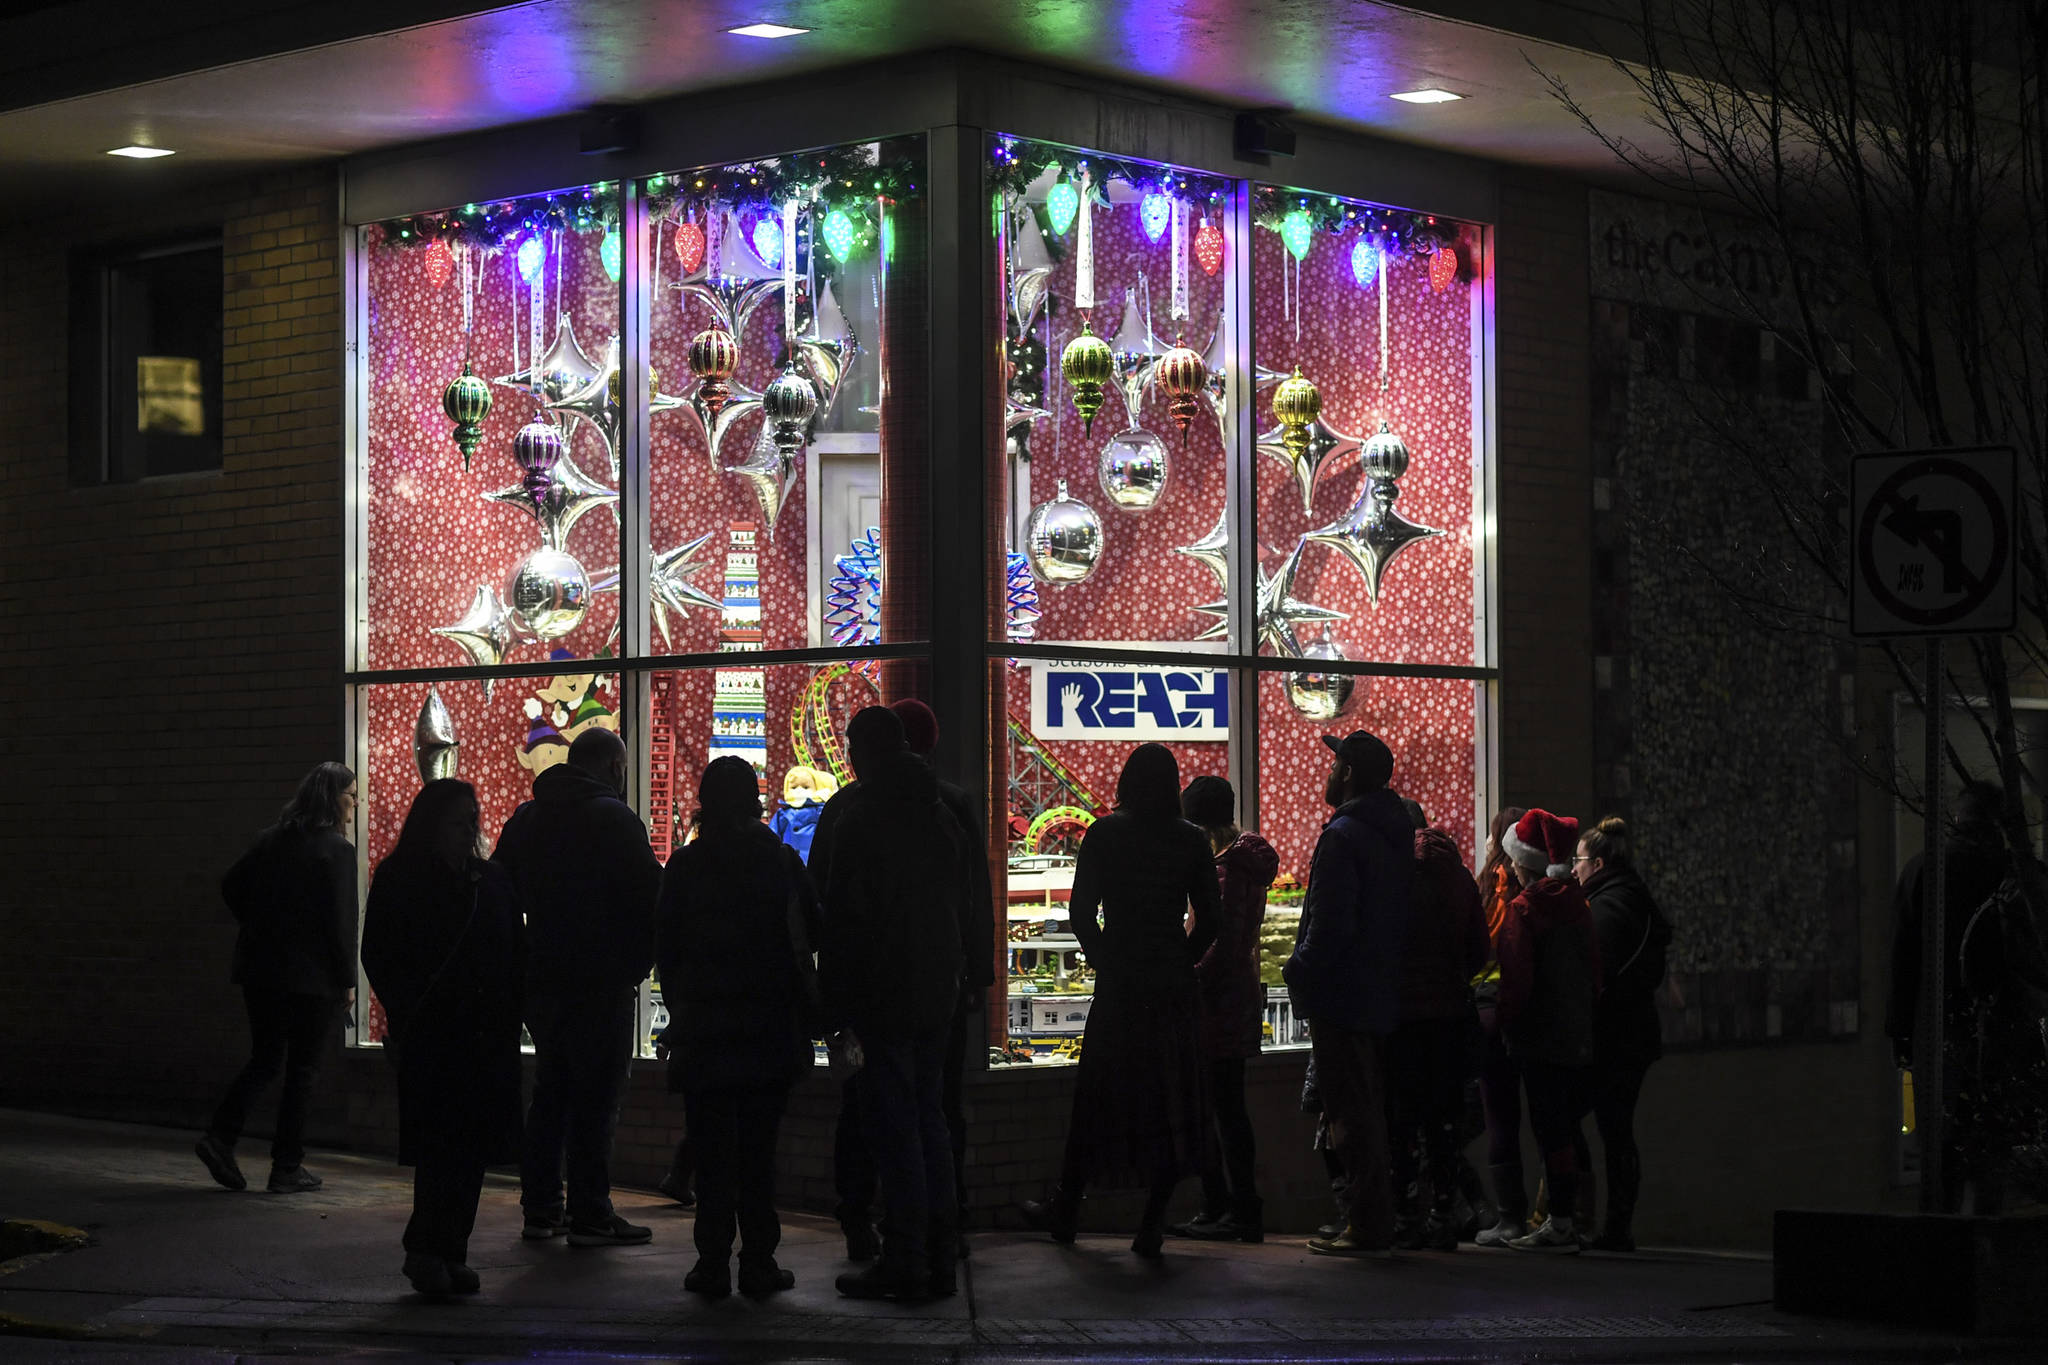 Juneau residents take in the decorated window display at REACH during Gallery Walk on Friday, Dec. 6, 2019. (Michael Penn | Juneau Empire)